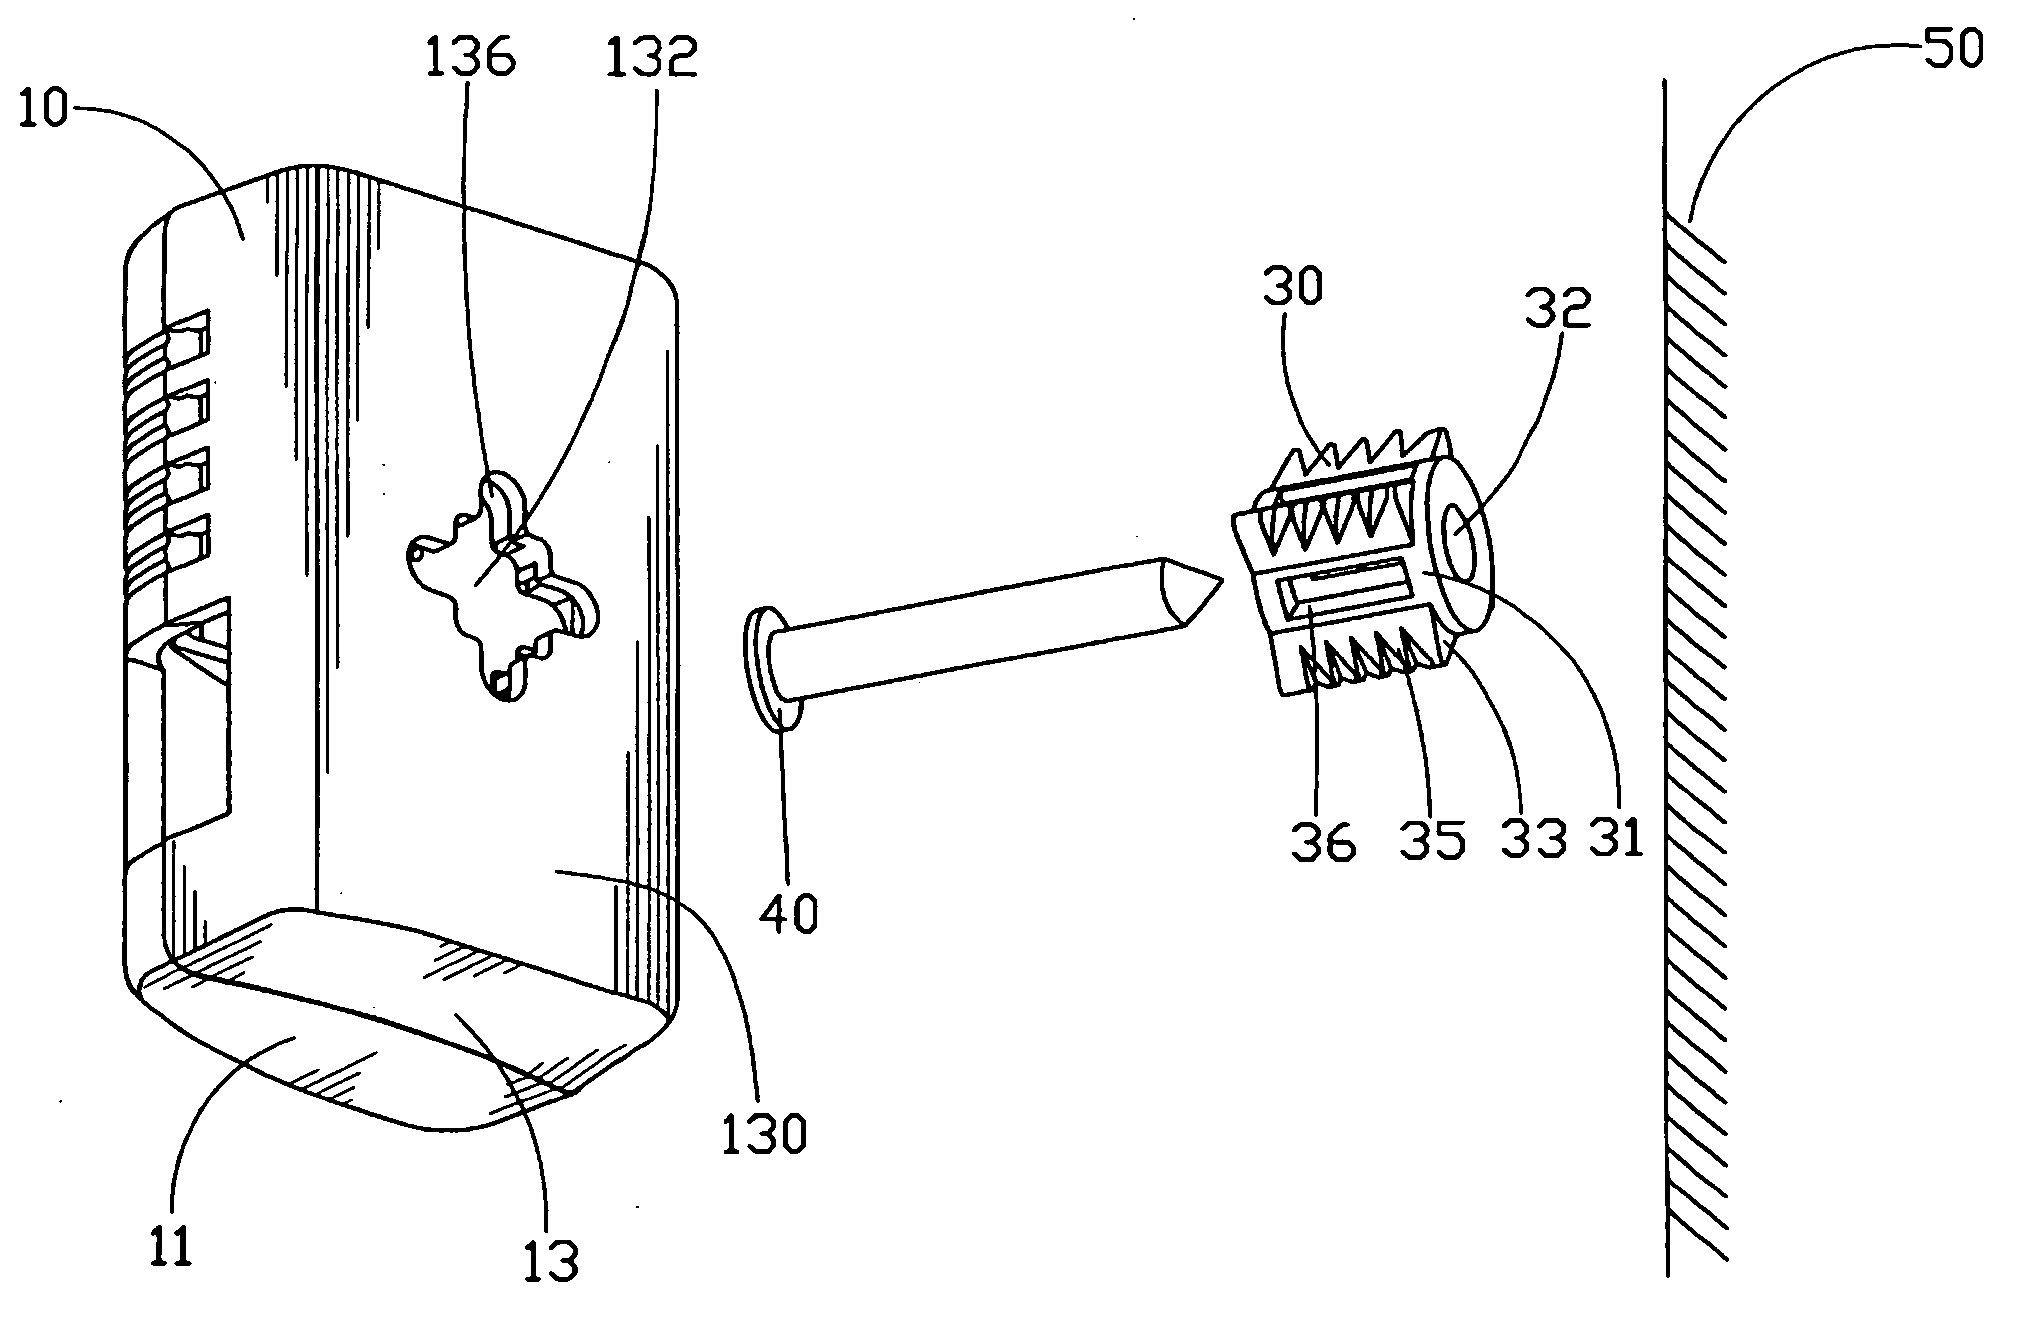 Adjustable wall-mounted information appliance assembly